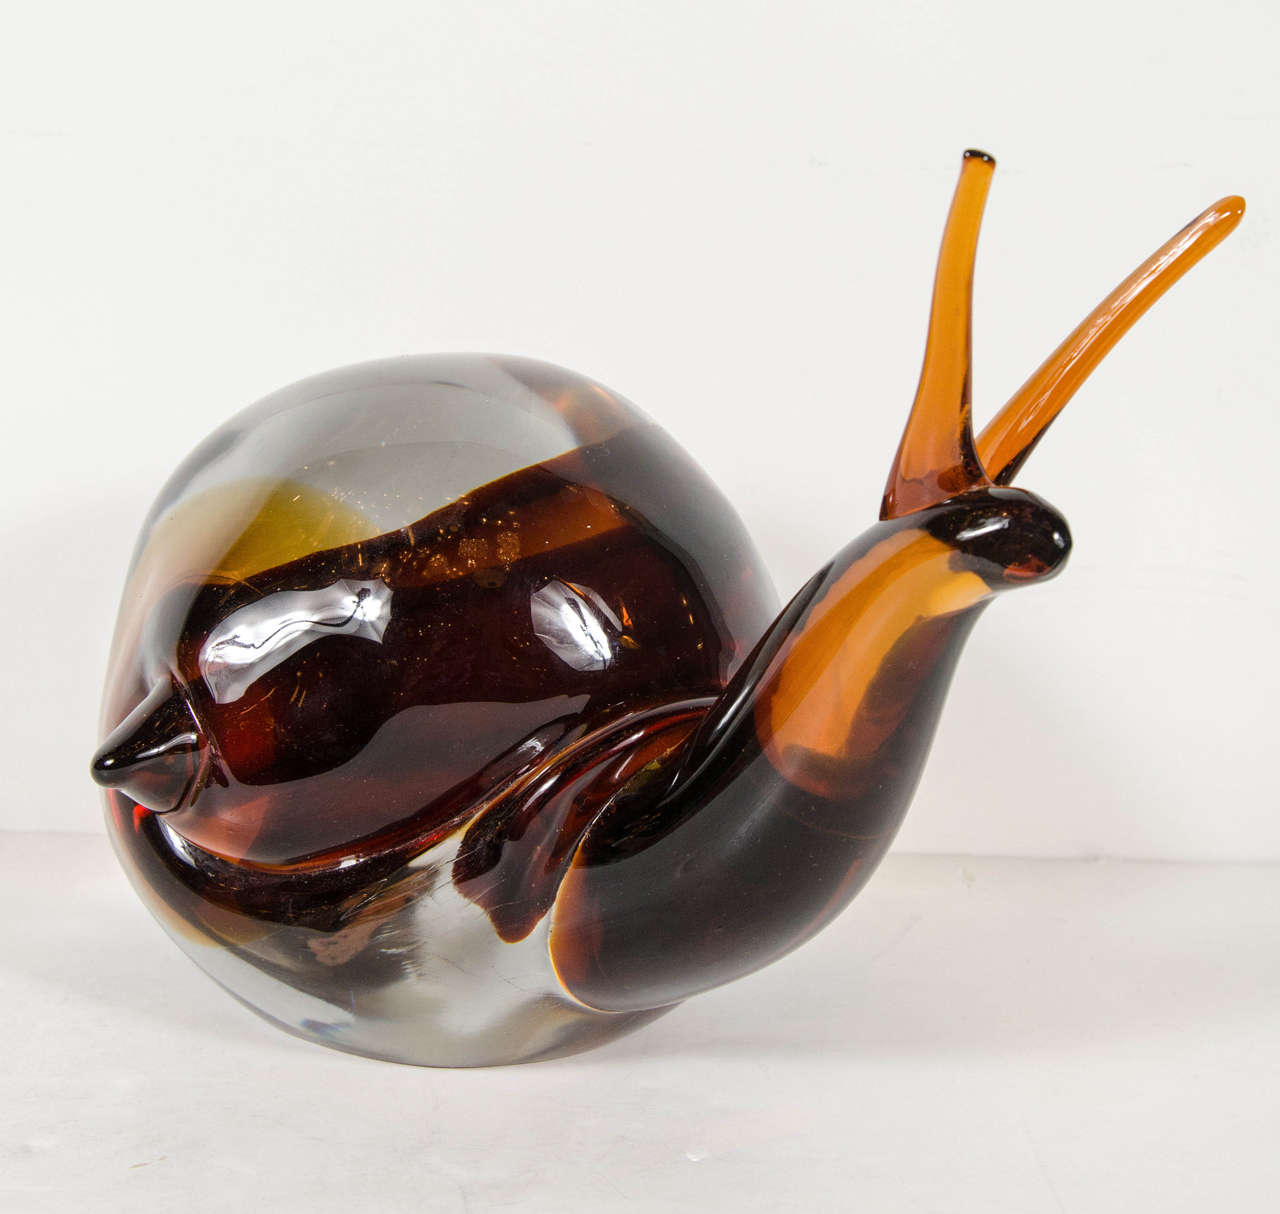 Mid-Century Modernist hand-blown Murano glass snail by Alfredo Barbini.  This exquisite, hand-blown Murano glass sculpture is done by Alfredo Barbini and features a large glass snail in a deep, rich Amber hue that is incased within its hand-blown